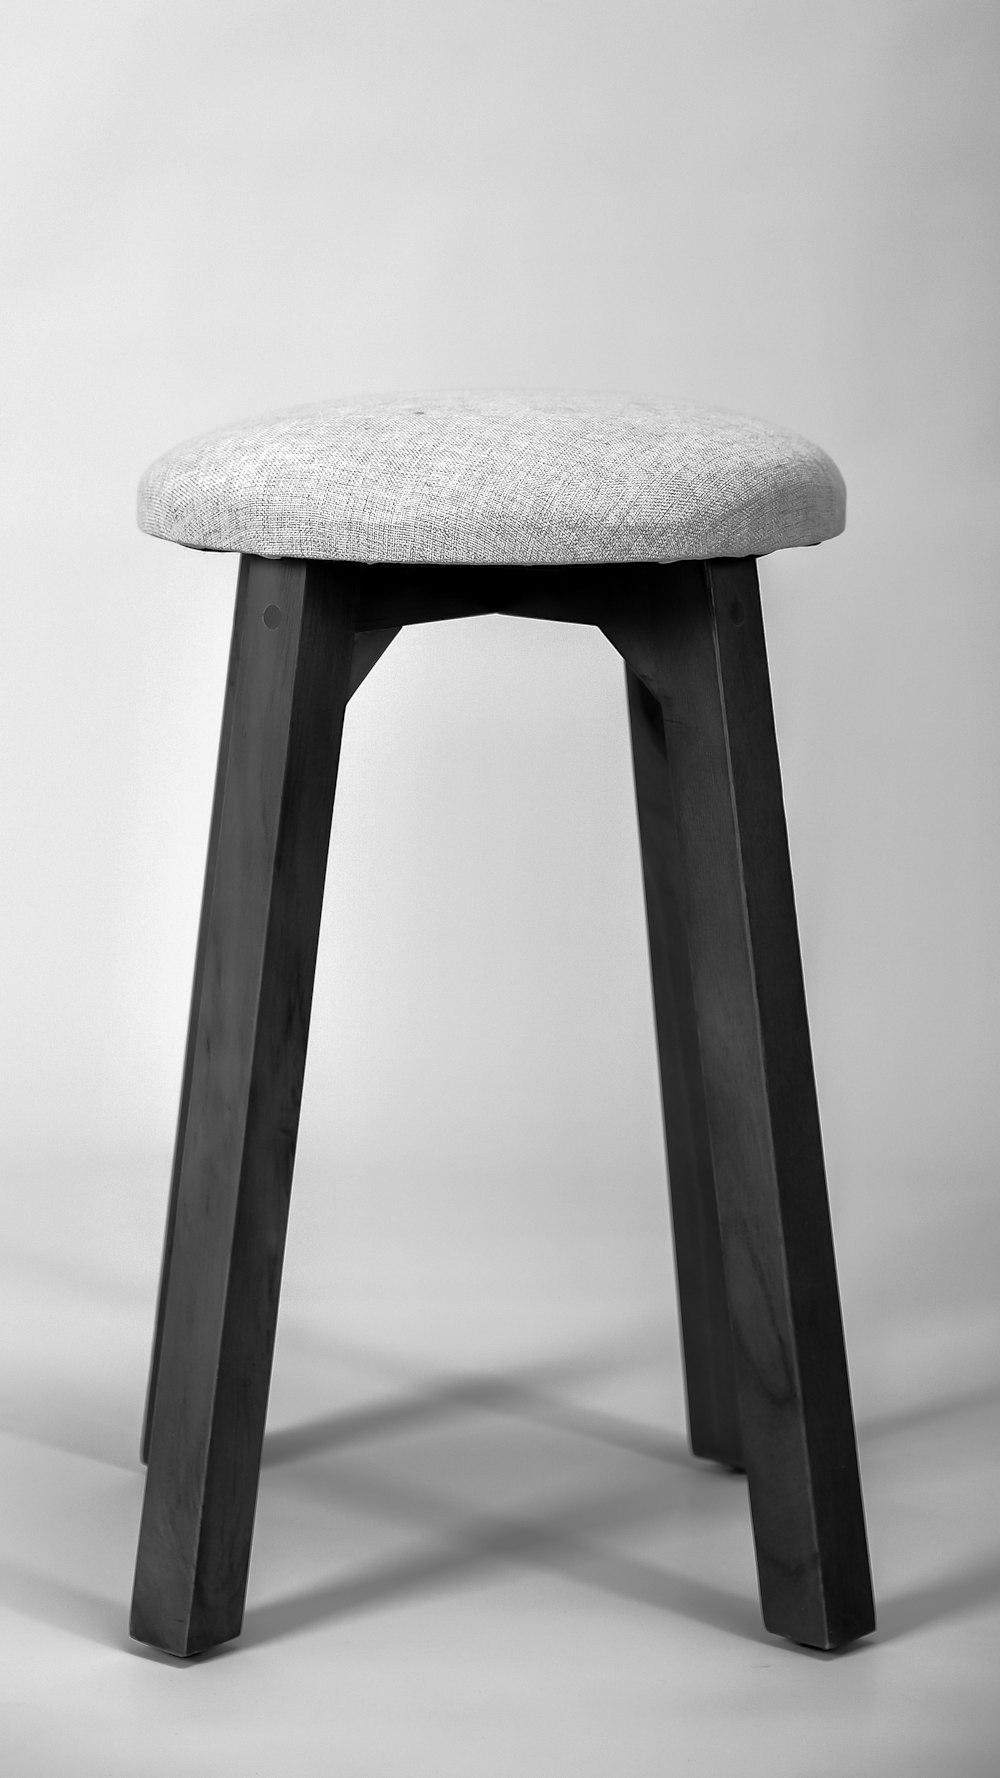 gray wooden seat on white surface